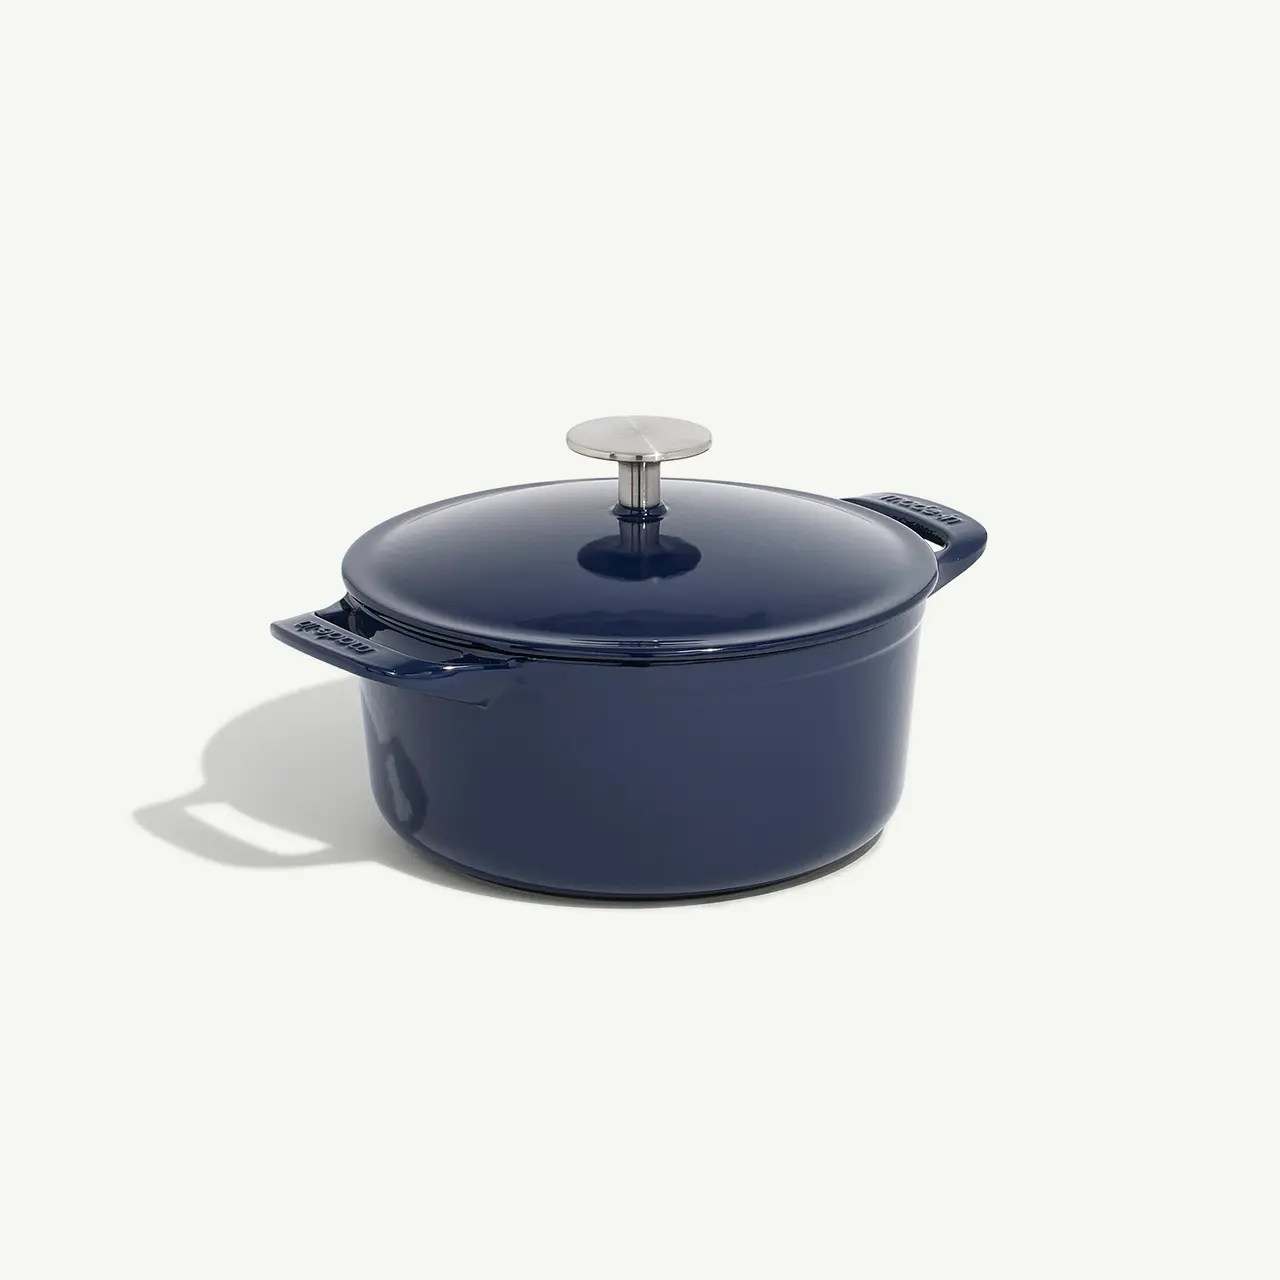 A blue enameled cast iron Dutch oven with a lid on a white background.